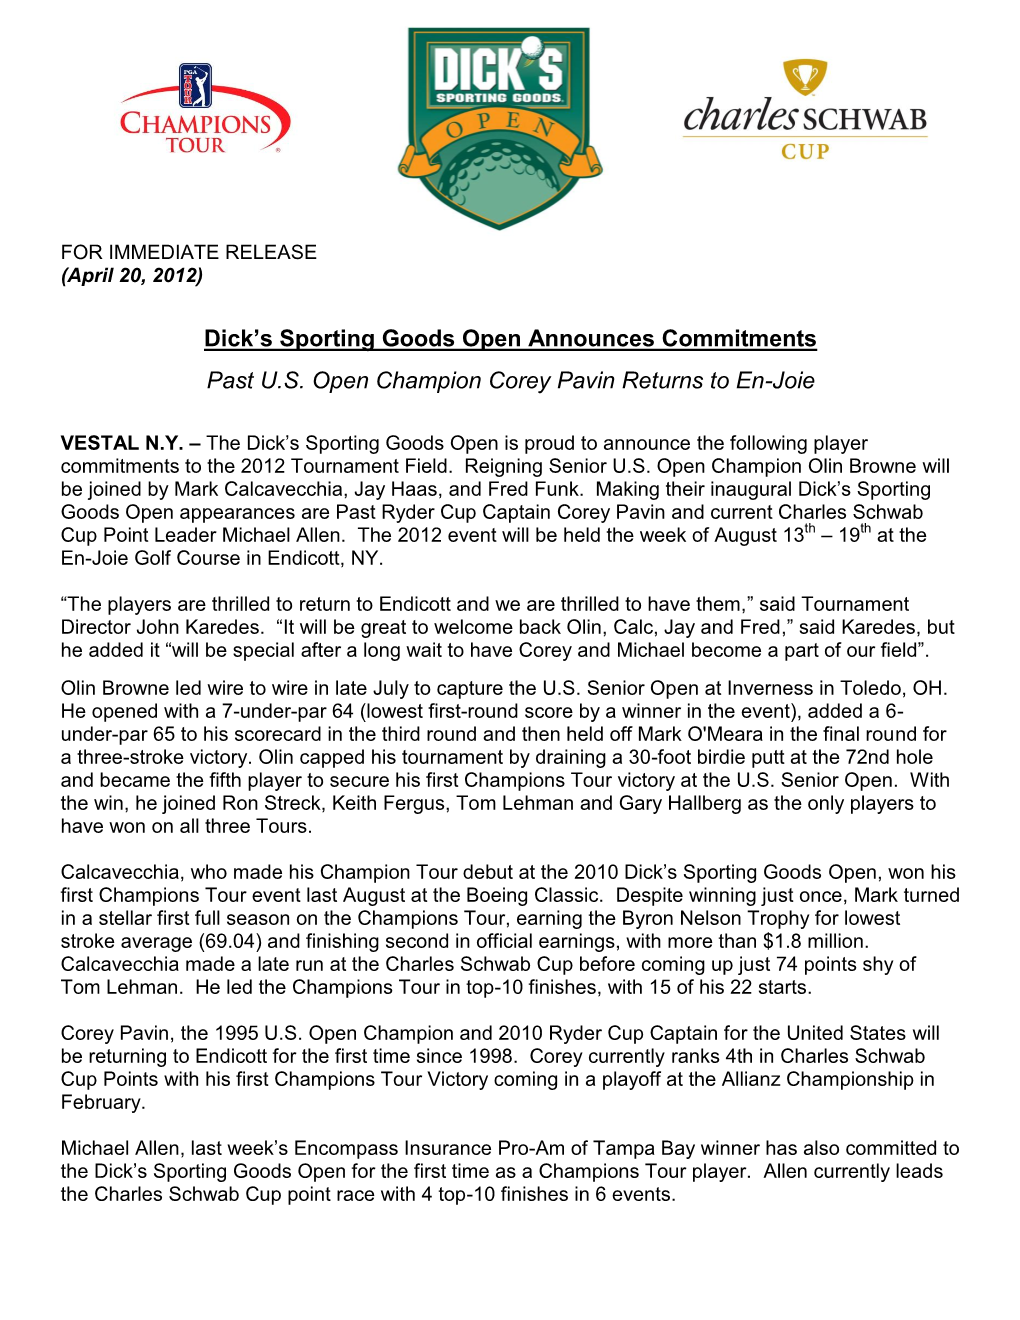 Dick's Sporting Goods Open Announces Commitments Past U.S